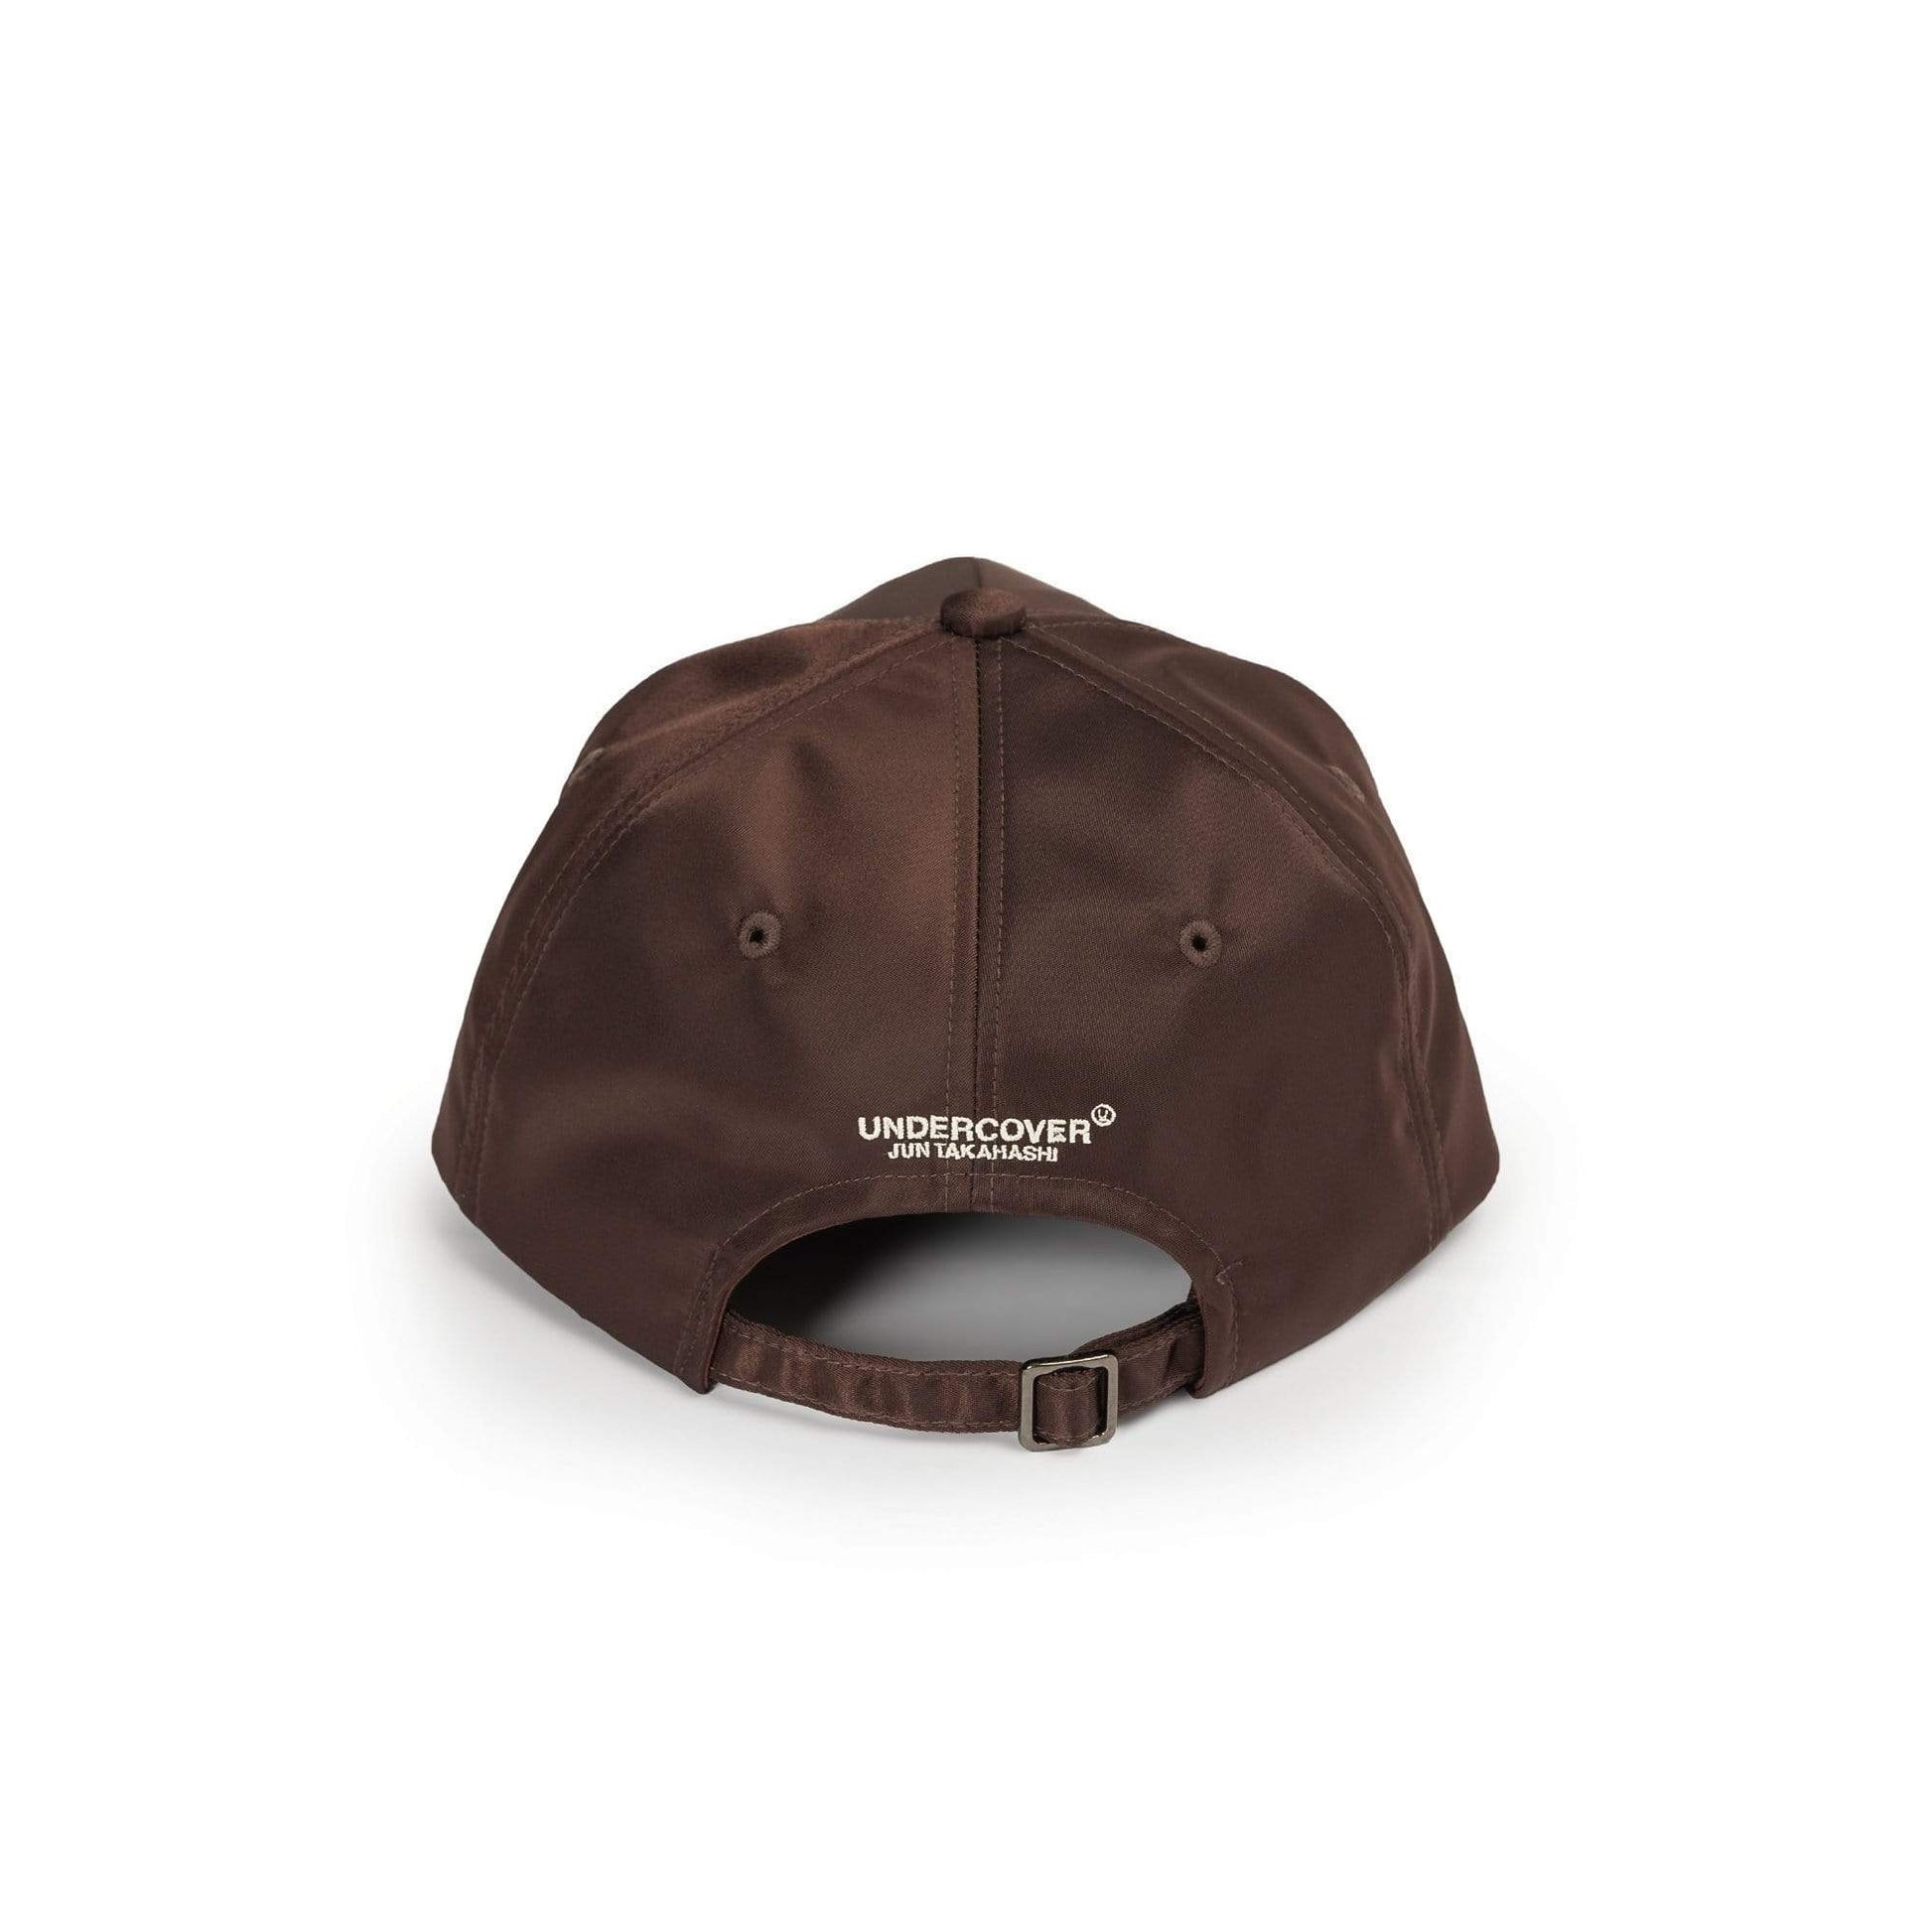 undercover future is the past cap (dark brown) - ucy4h03-dbrown - a.plus - Image - 2